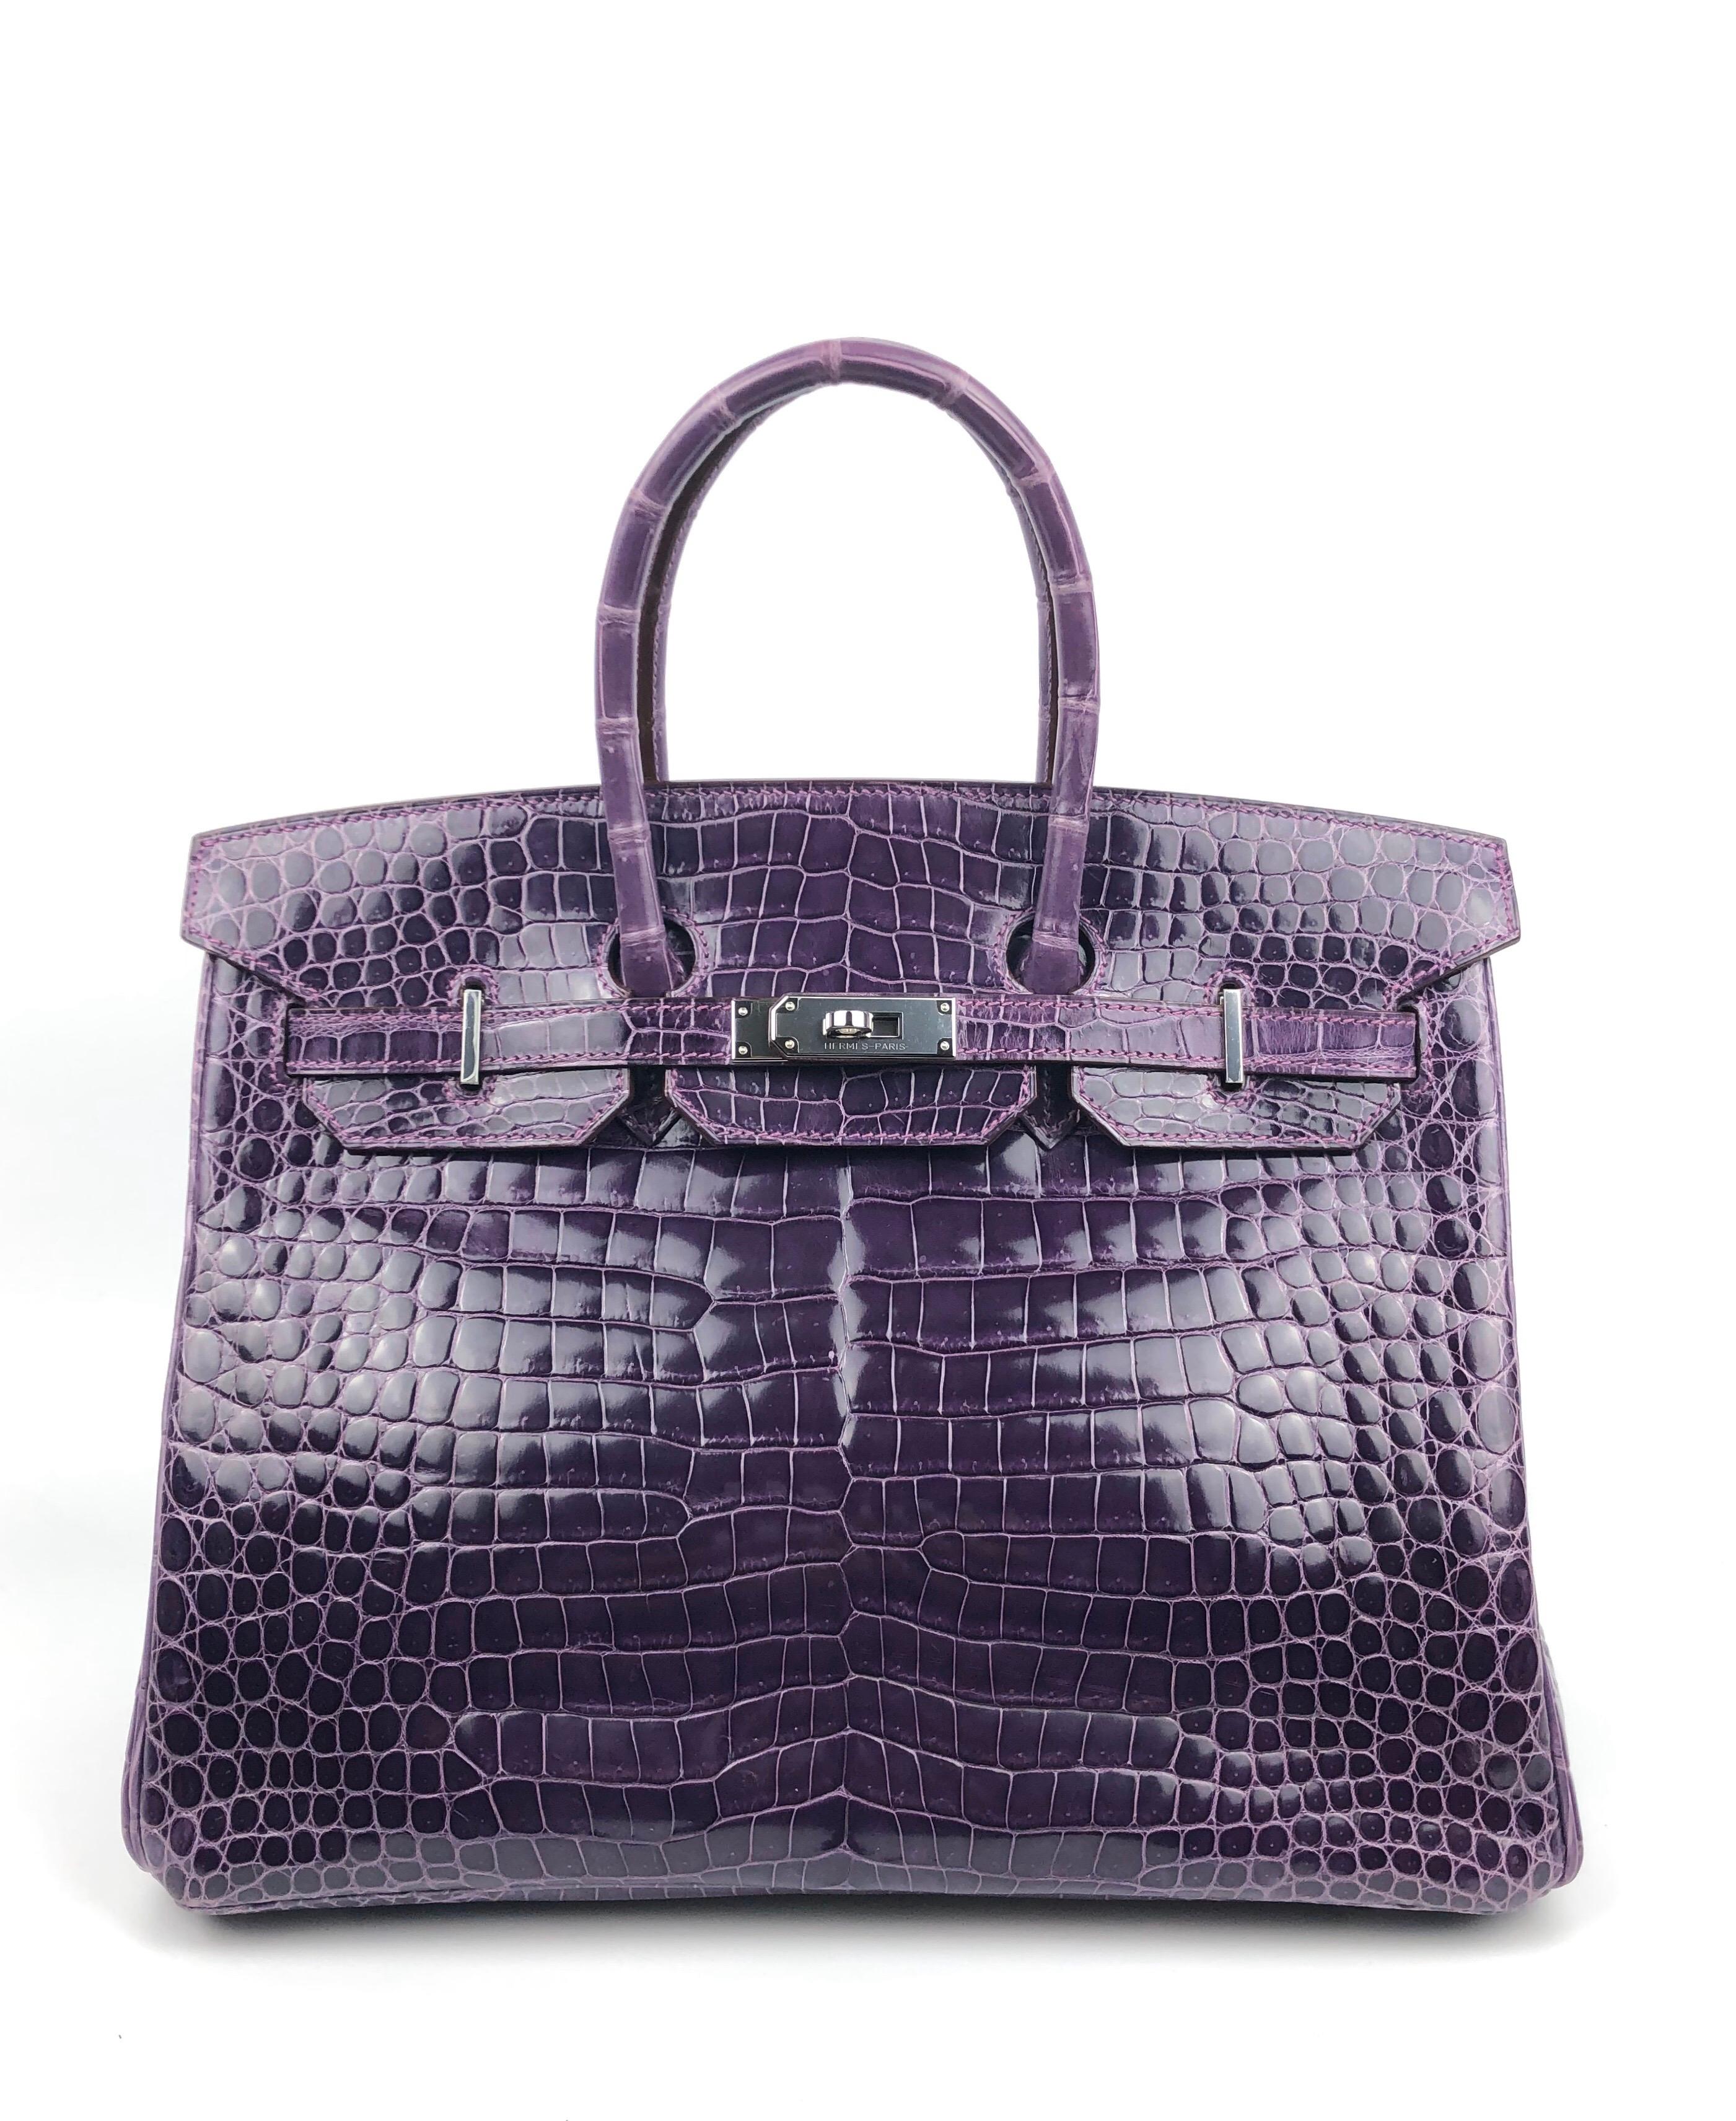 Hermes Birkin 35 Purple Amethyst Shinny Crocodile Palladium Hardware W/ Plastic. Pristine Condition with Plastic on all Hardware. 

Shop with confidence from Lux Addicts. Authenticity Guaranteed! 